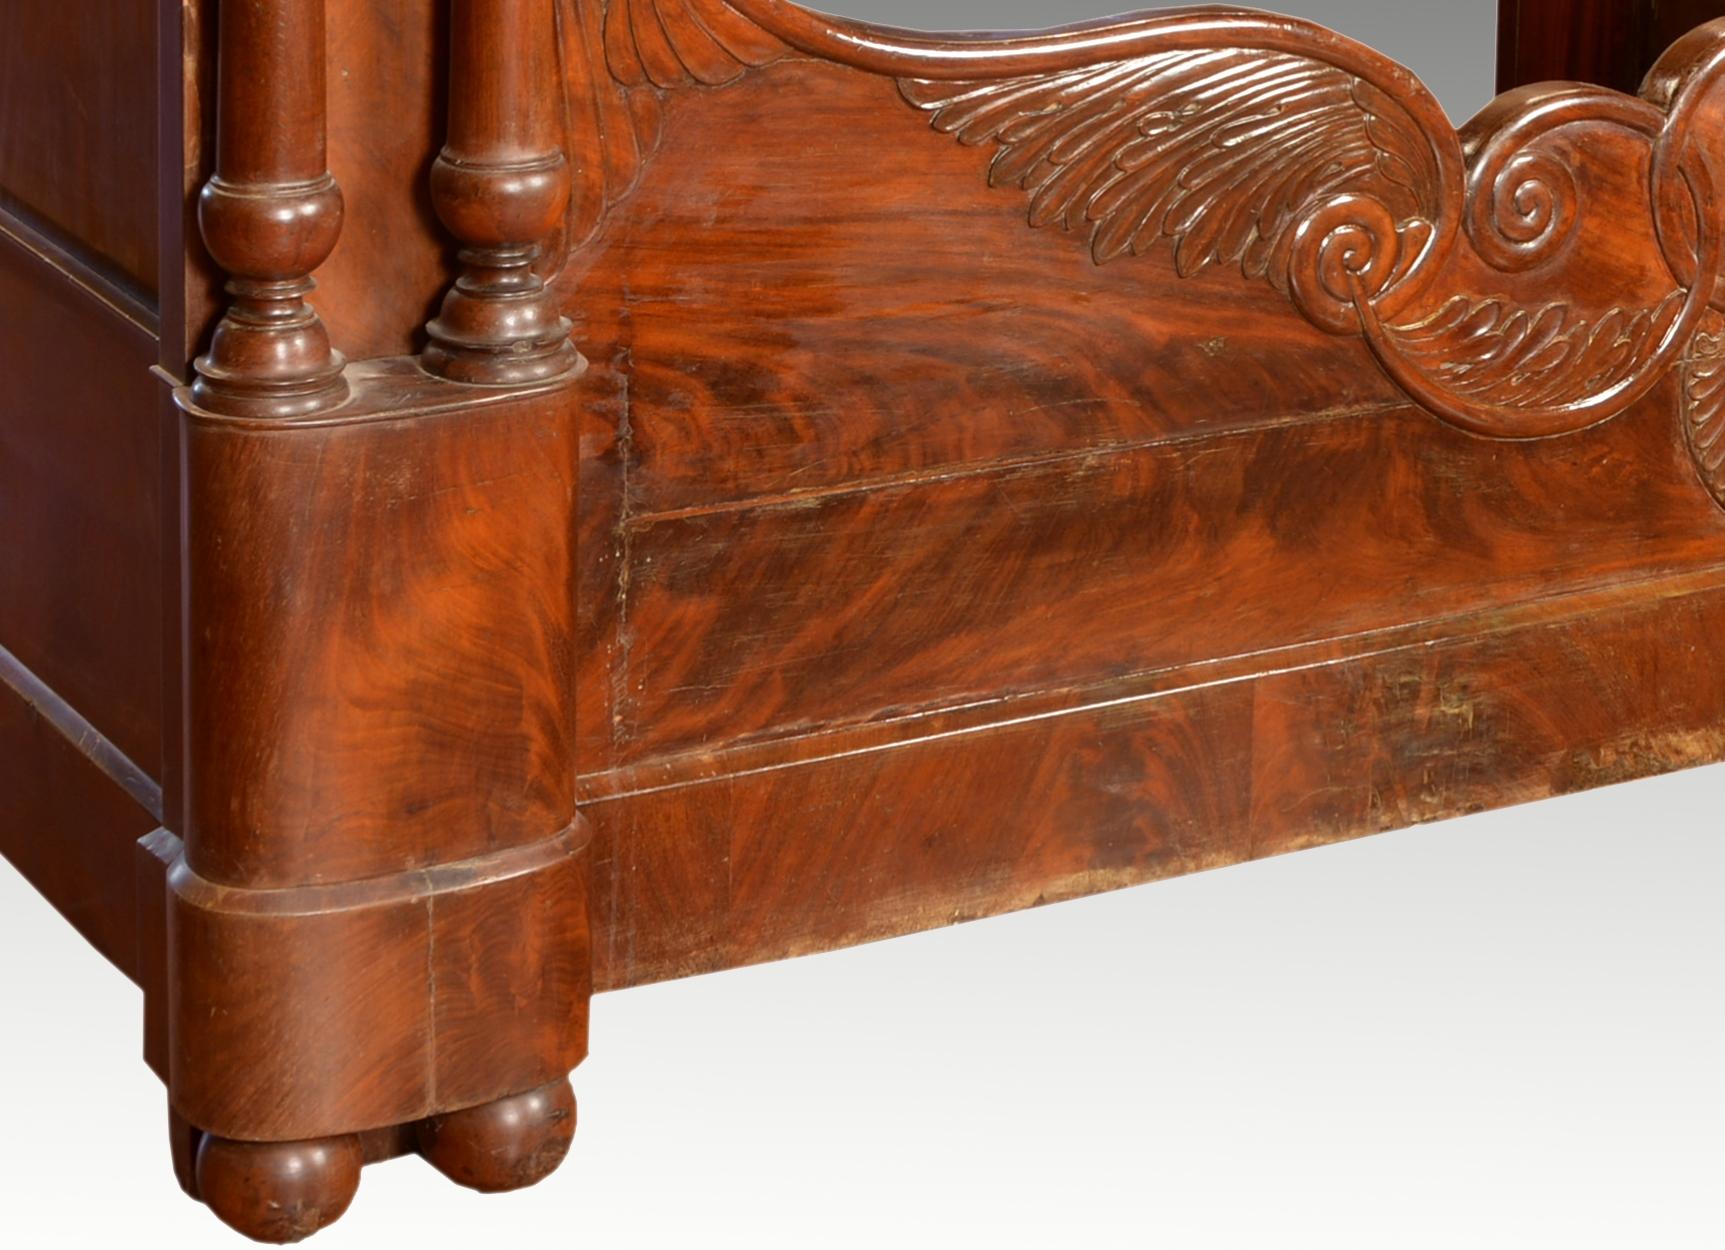 Wood Mahogany Neoclassical Bed Frame, 19th Century For Sale